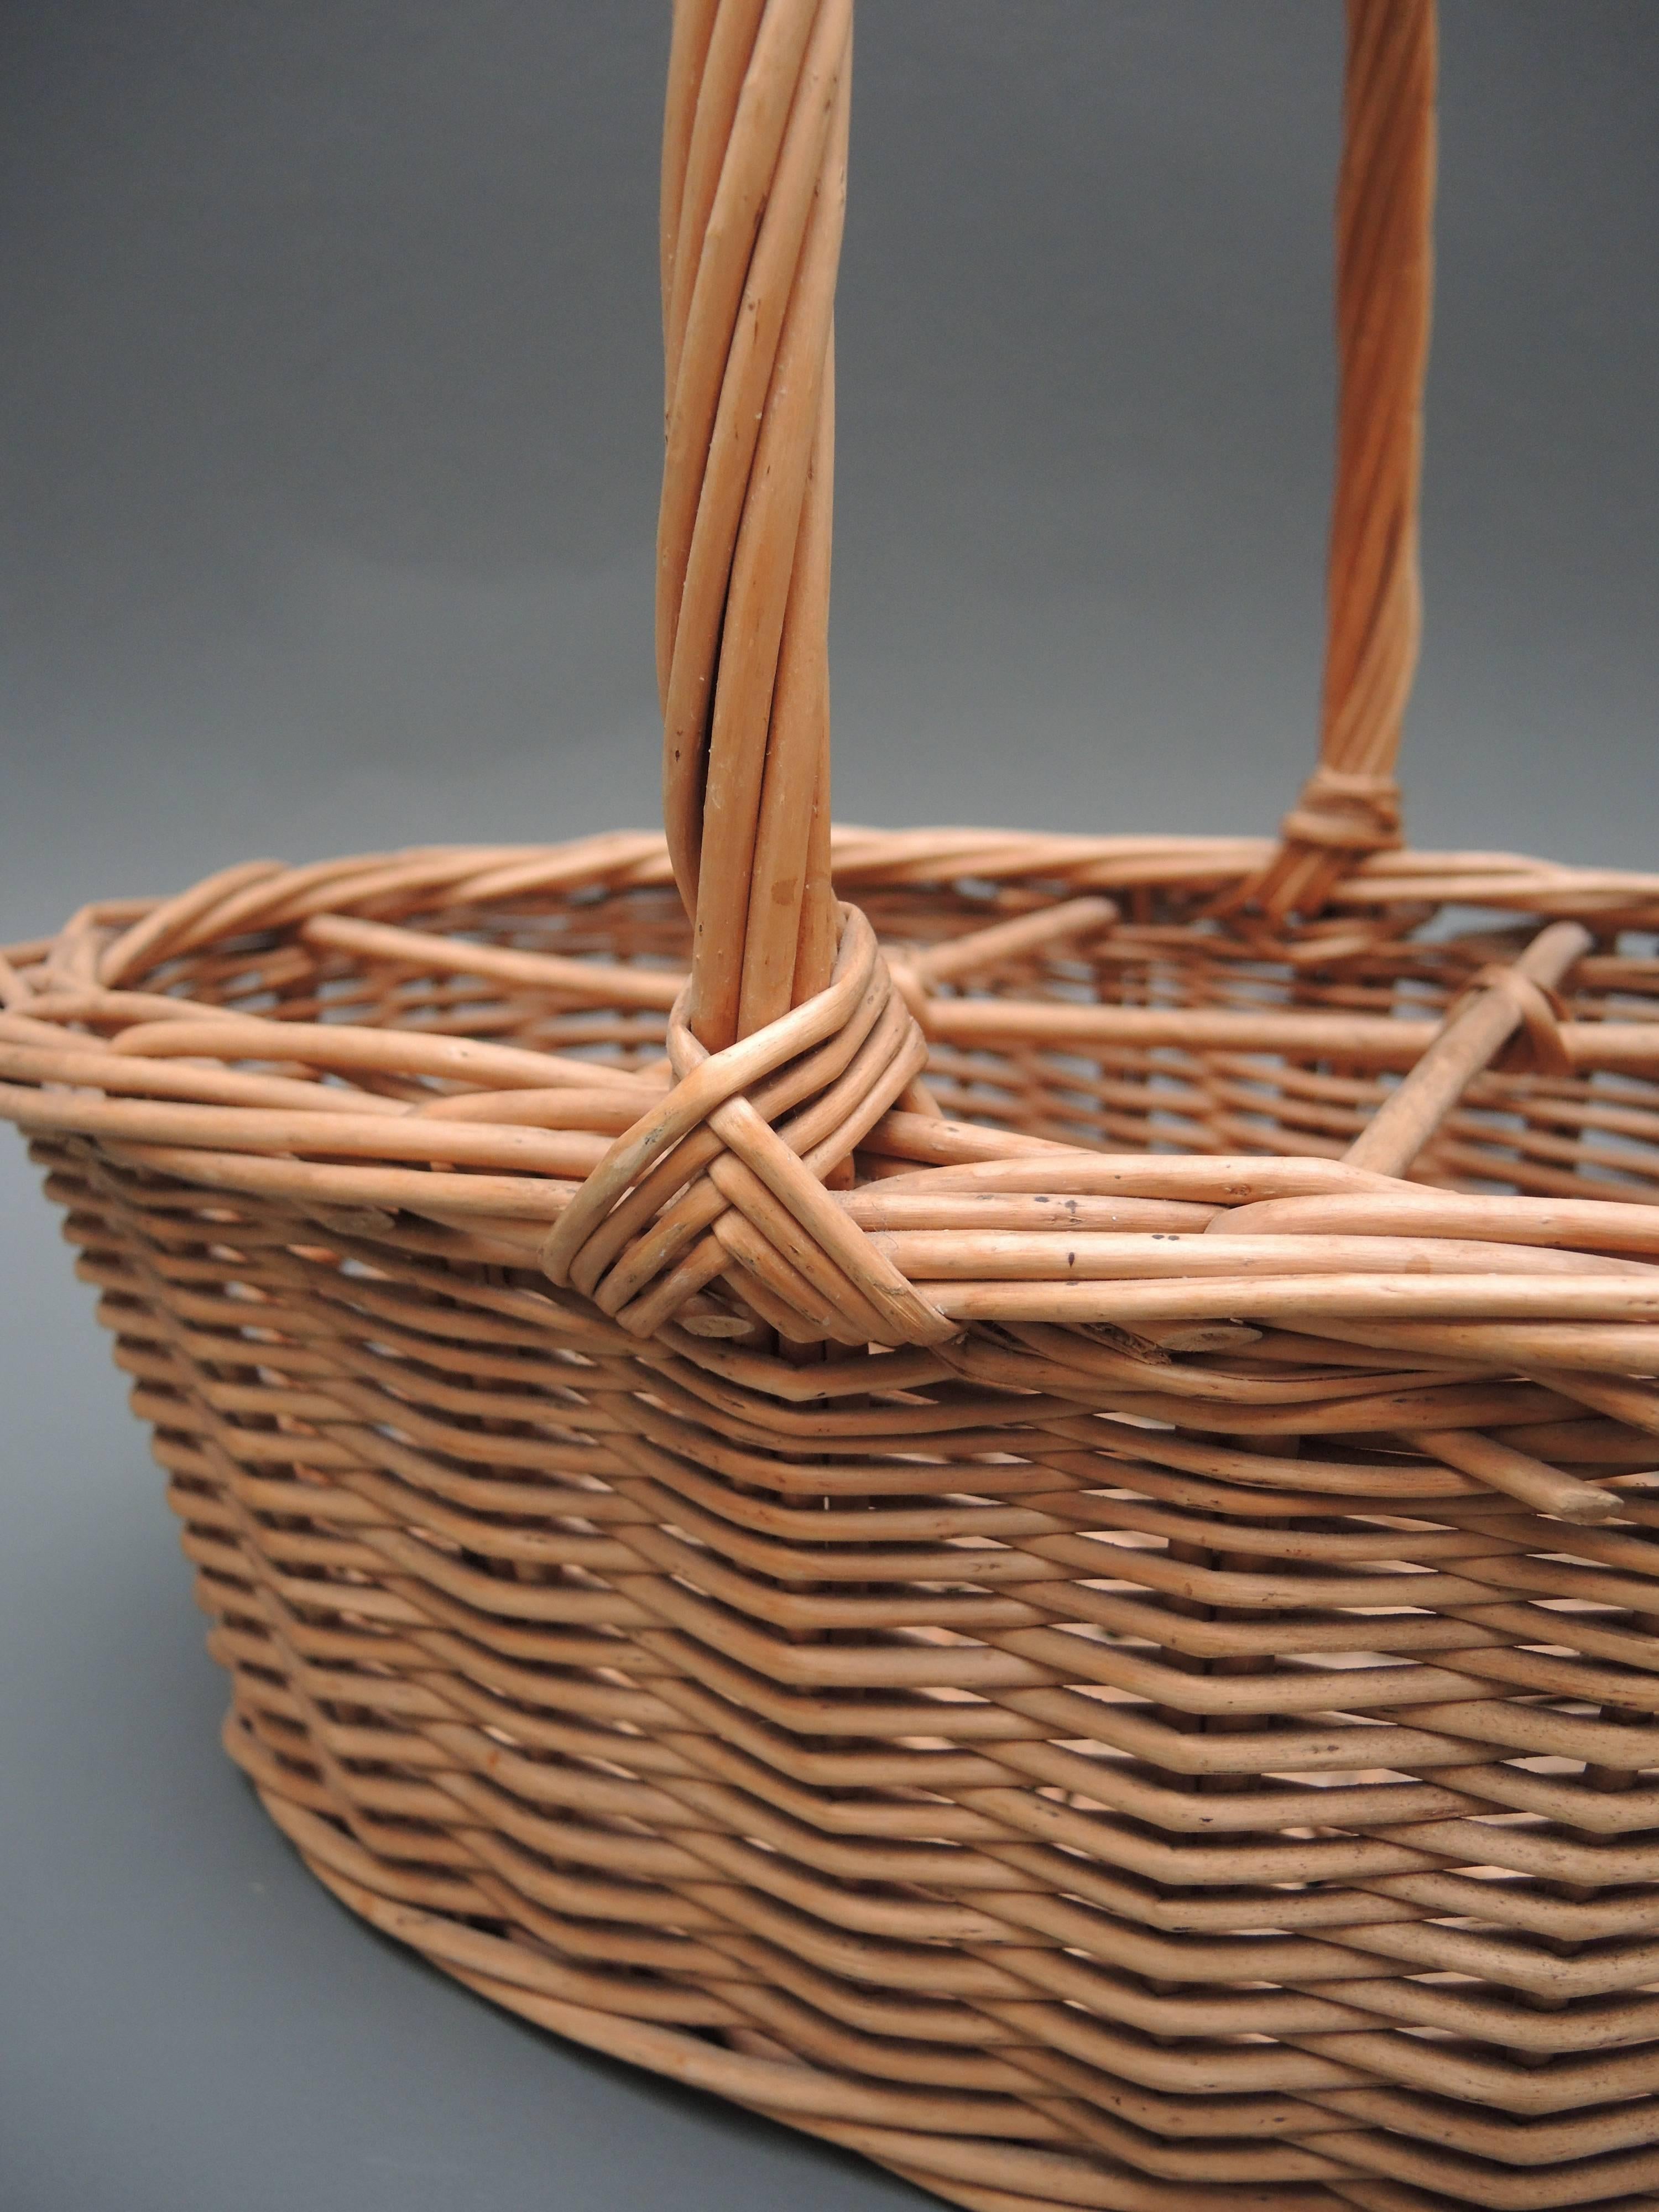 French wicker market basket to carry wine bottles, circa 1920.
Great to use to hold wine, napkins or magazines!